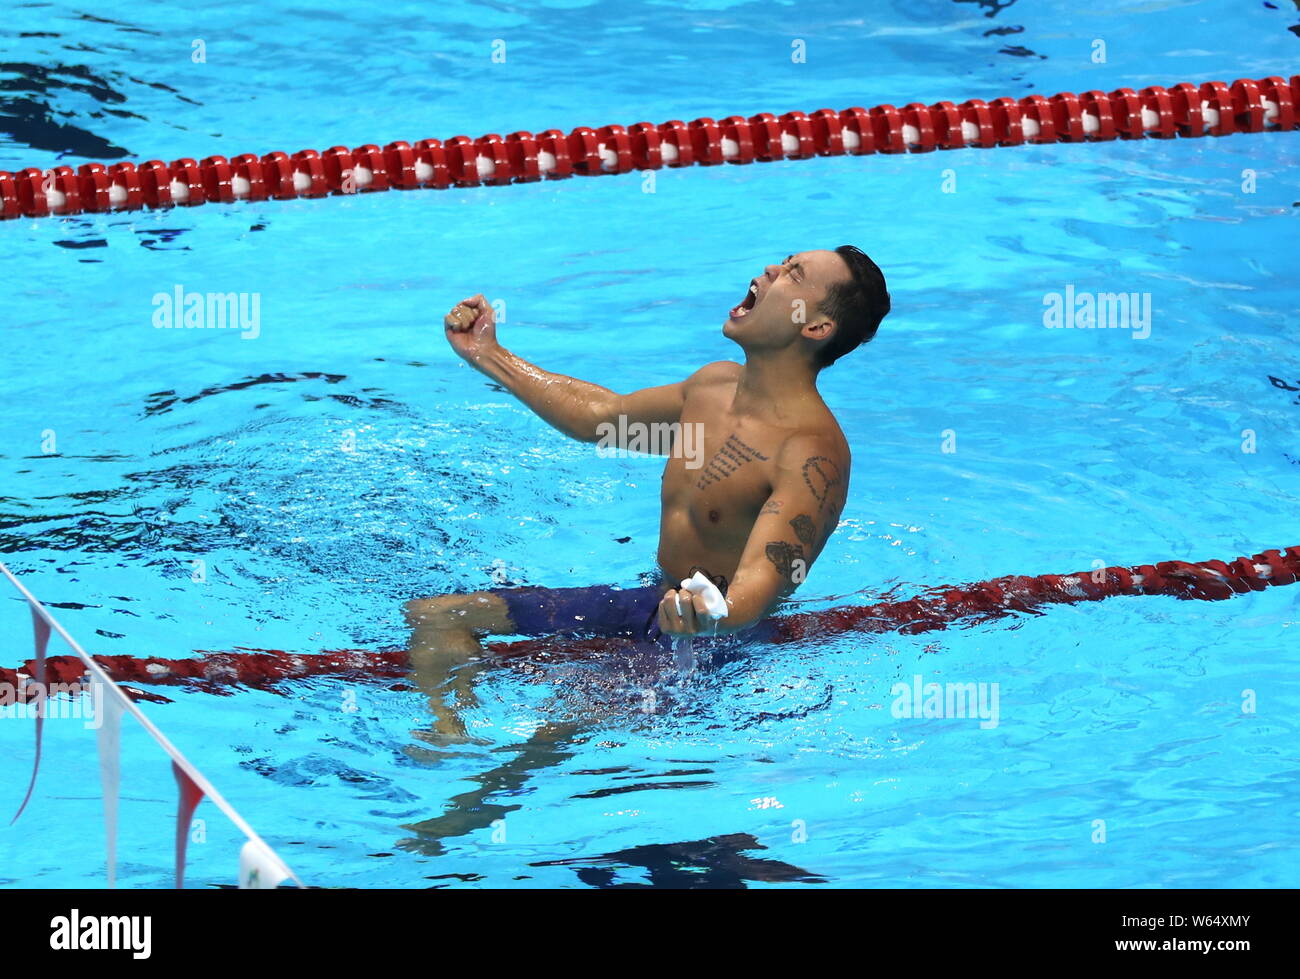 Yu Hexin of China celebrates after winning the men's 4x100 medley relay swimming final during the 2018 Asian Games, officially known as the 18th Asian Stock Photo